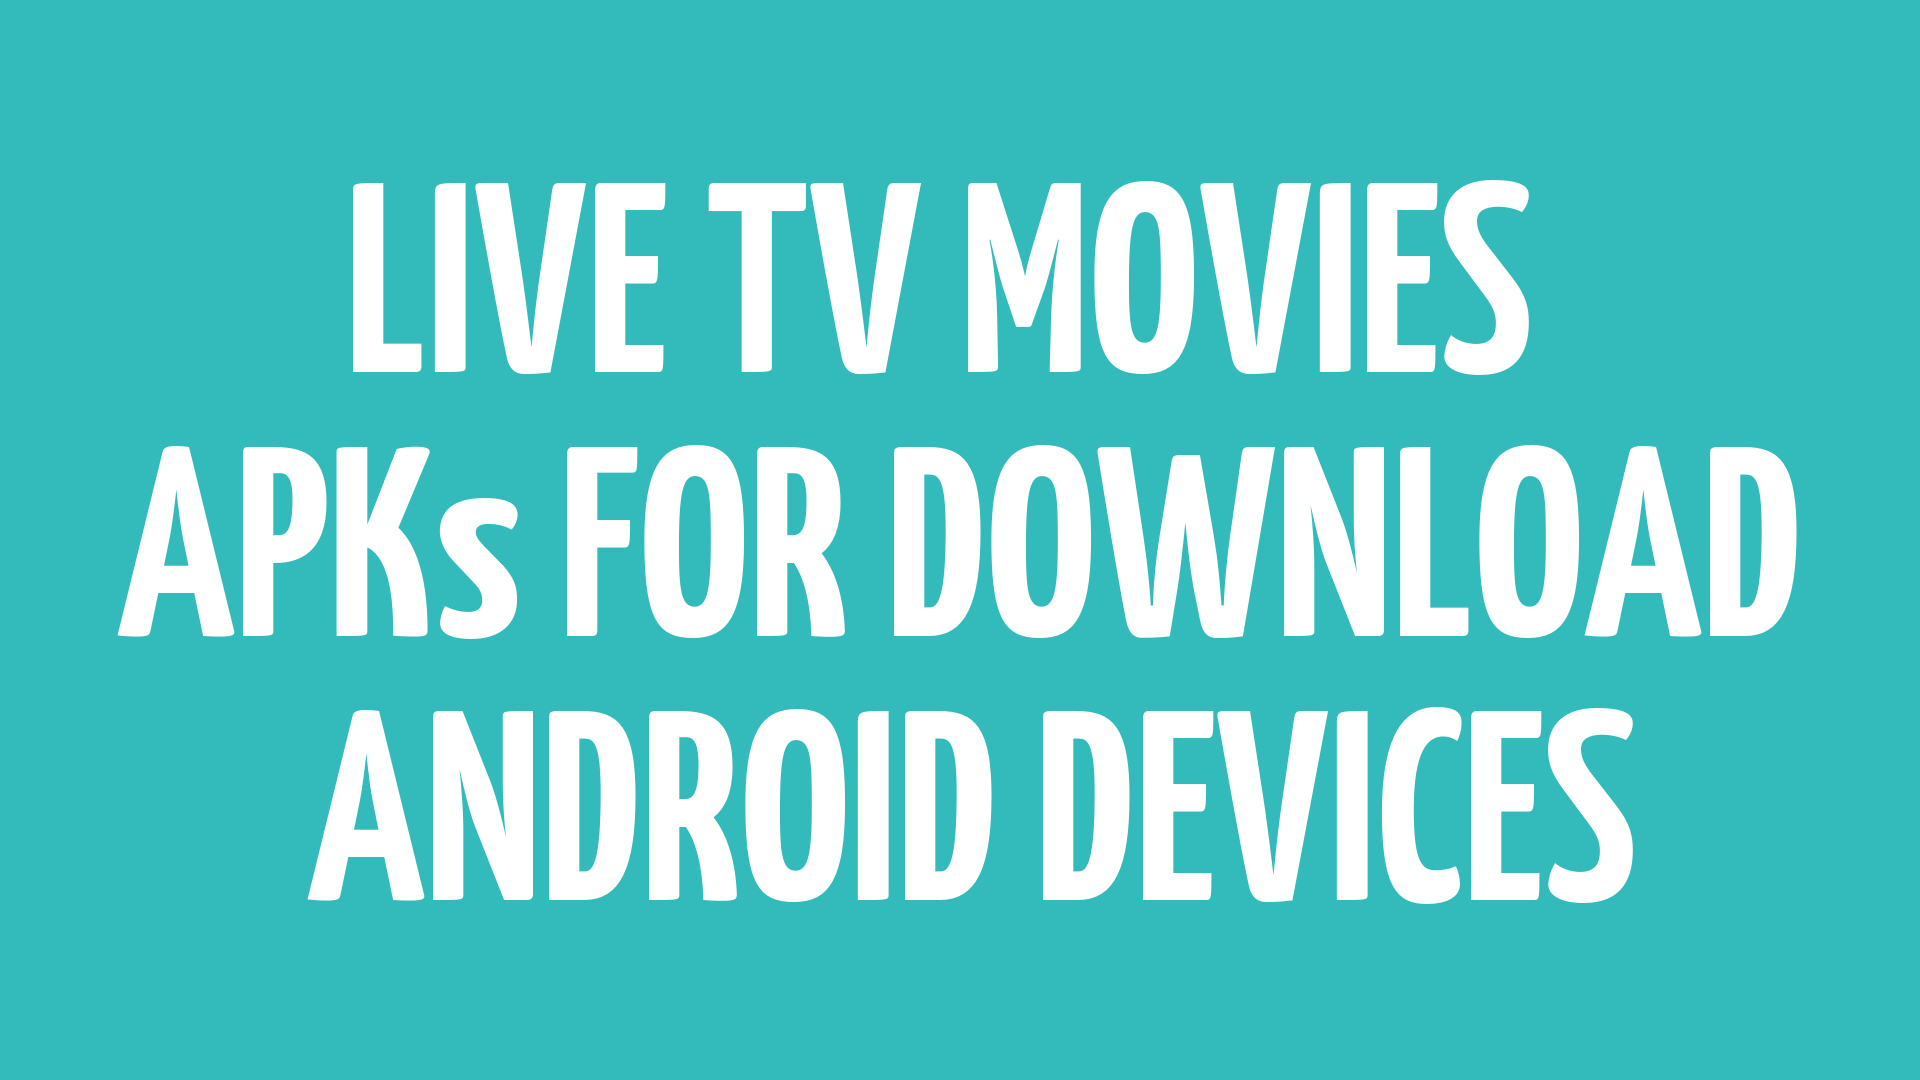 TOP 17 ANDROID APPS TO WATCH FREE LIVE TELEVISION AND MOVIES